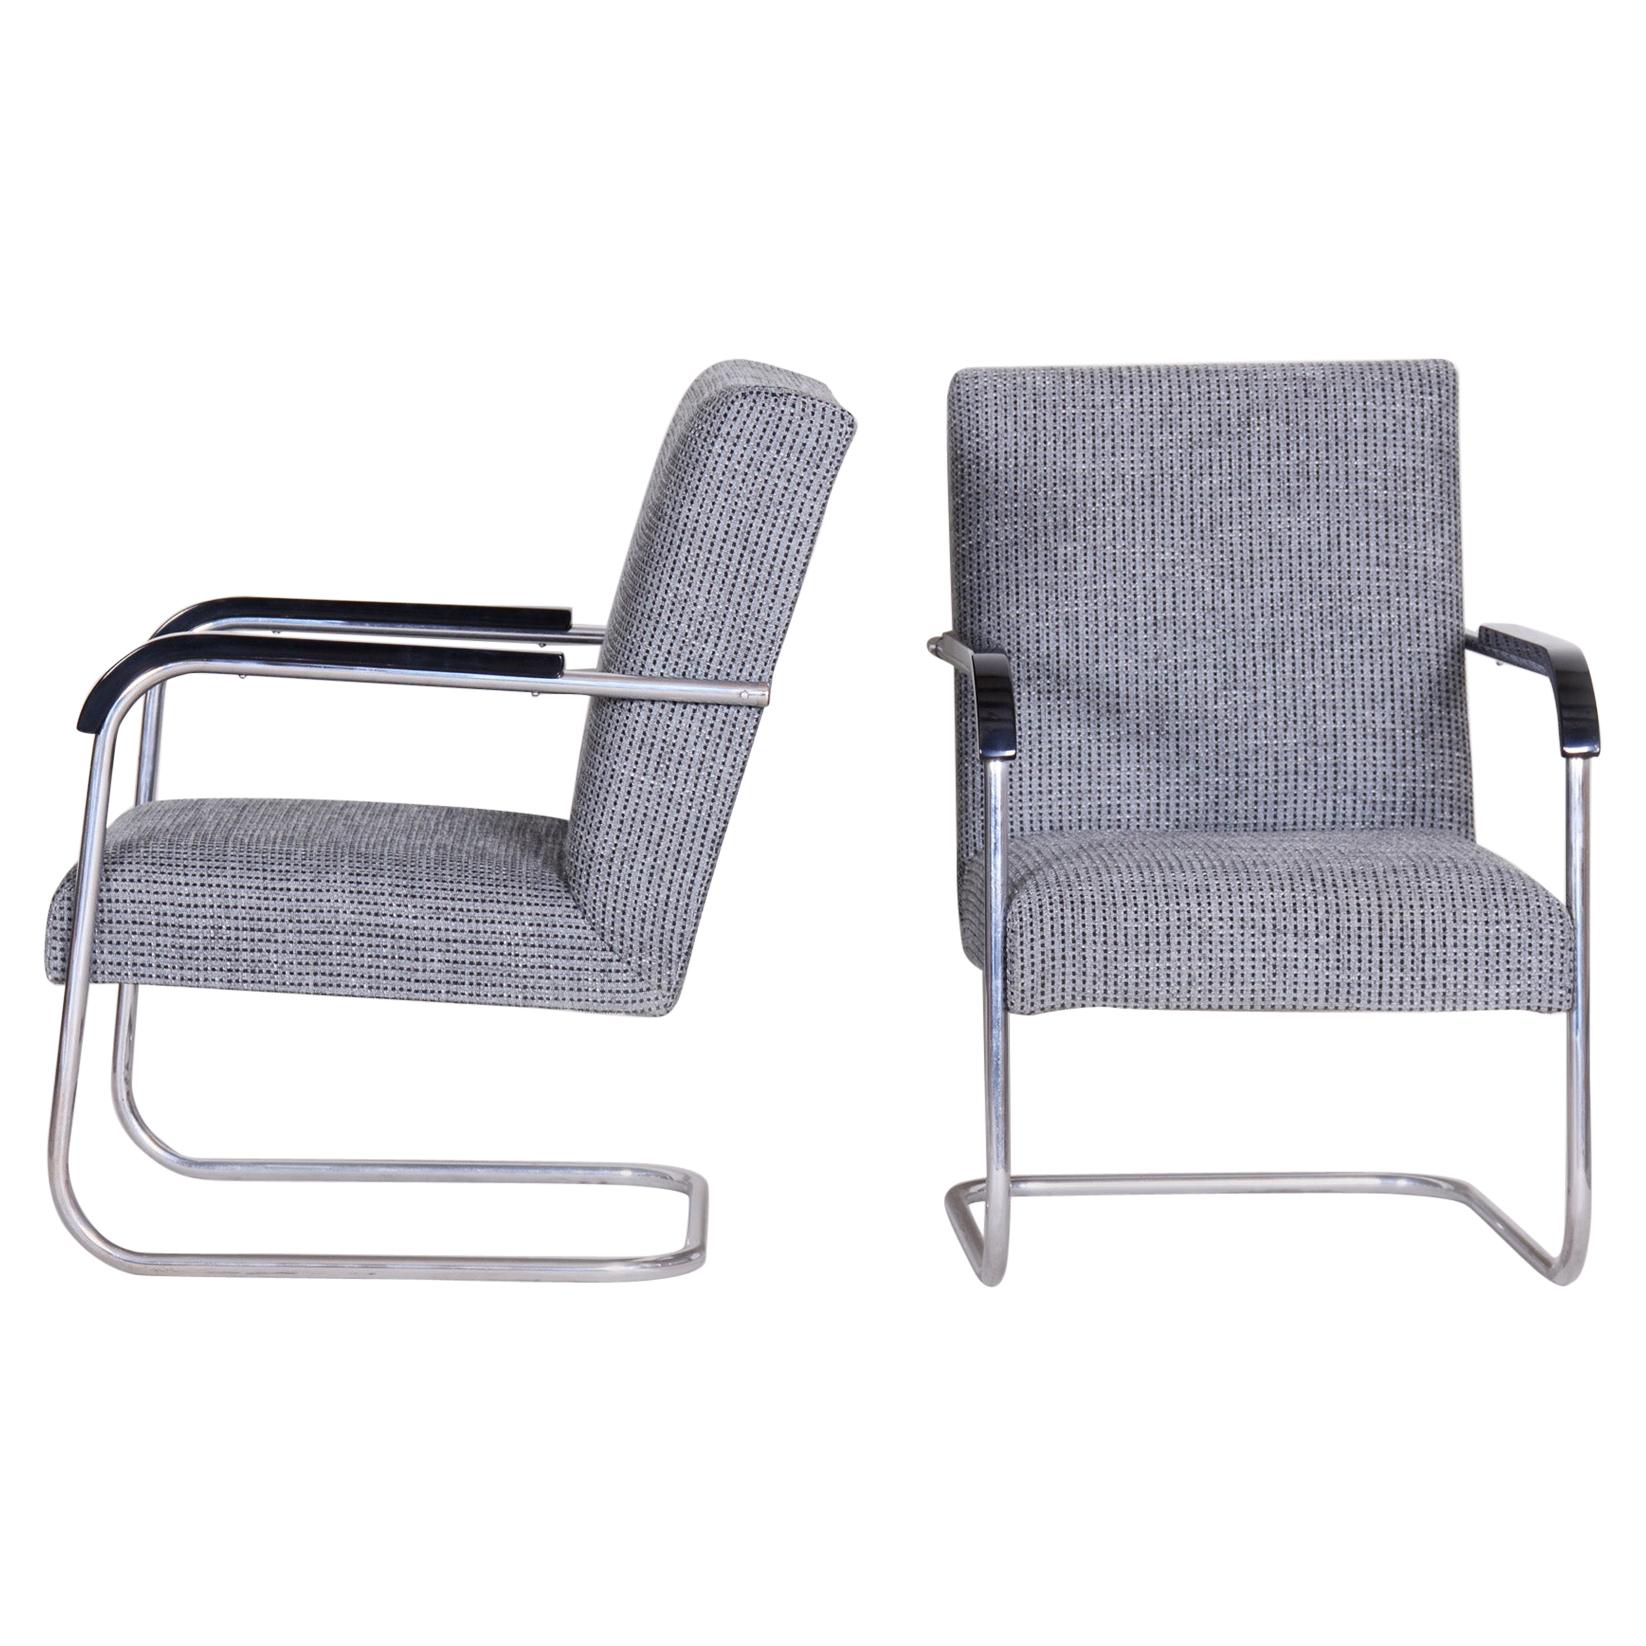 Pair of Restored Tubular Thonet Armchairs by Anton Lorenz, New Upholstery, 1930s For Sale